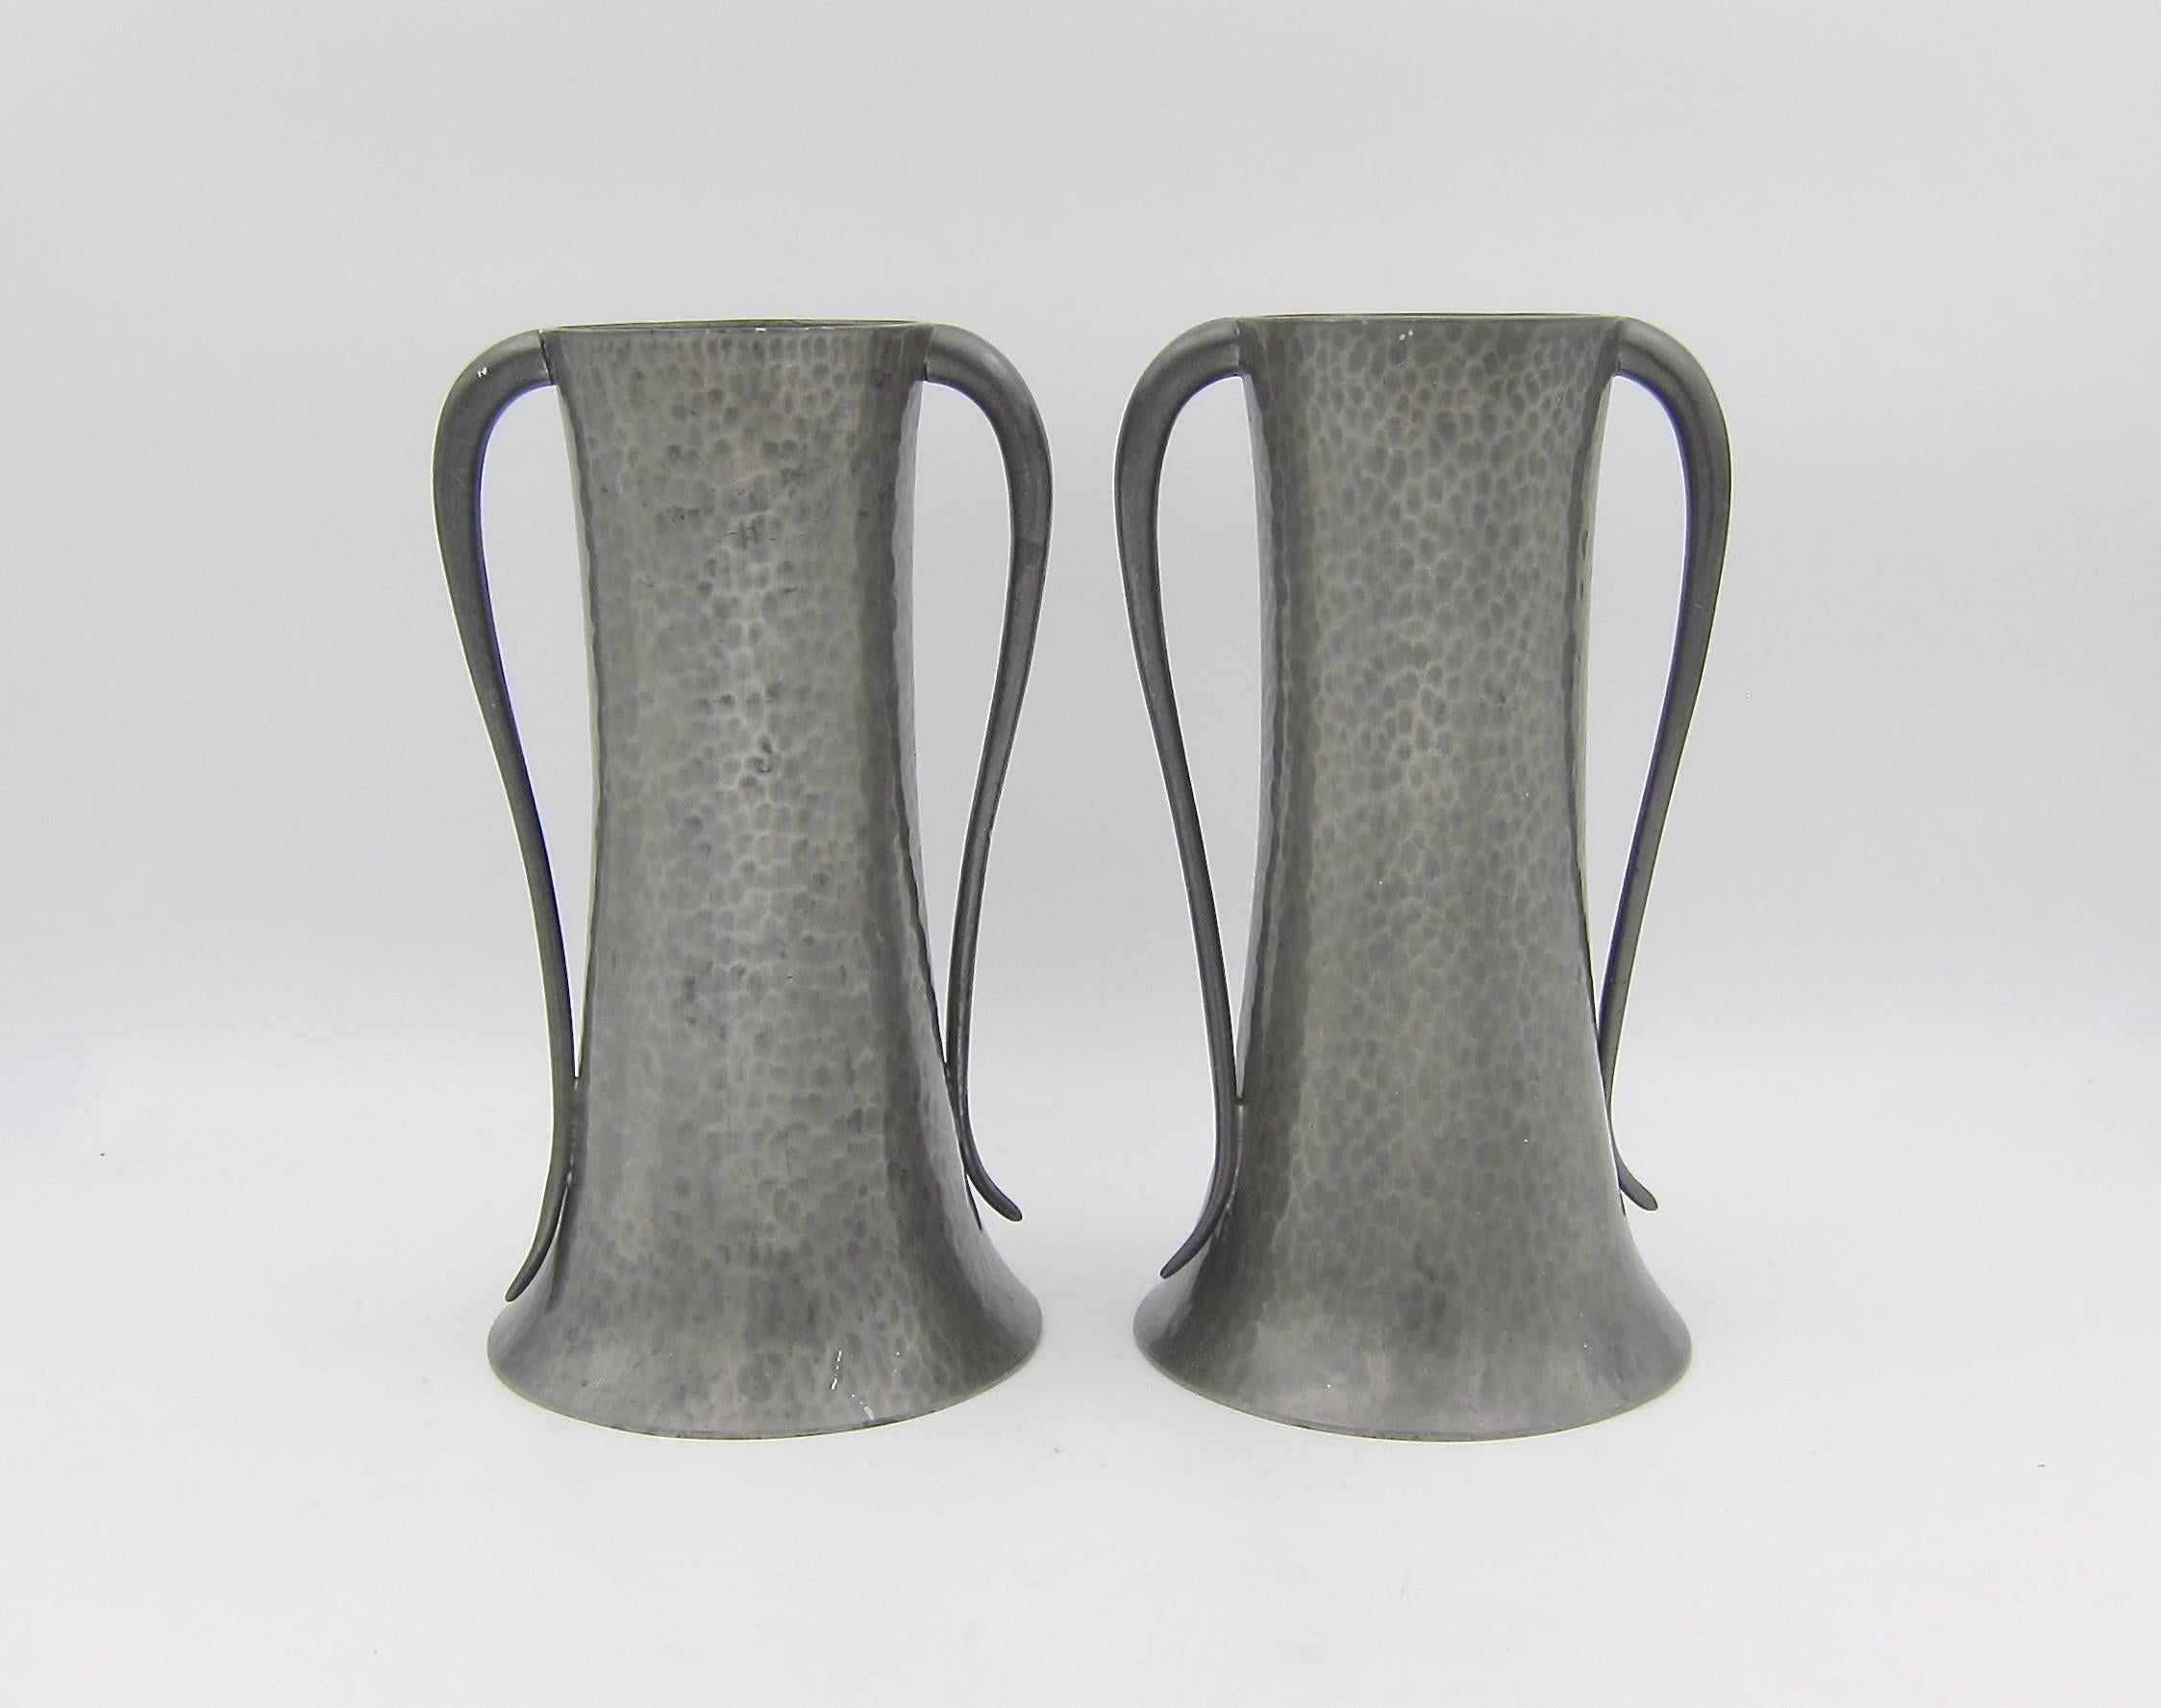 Hammered English Walker & Co Art Nouveau Vase Pair in Hand Beaten Pewter